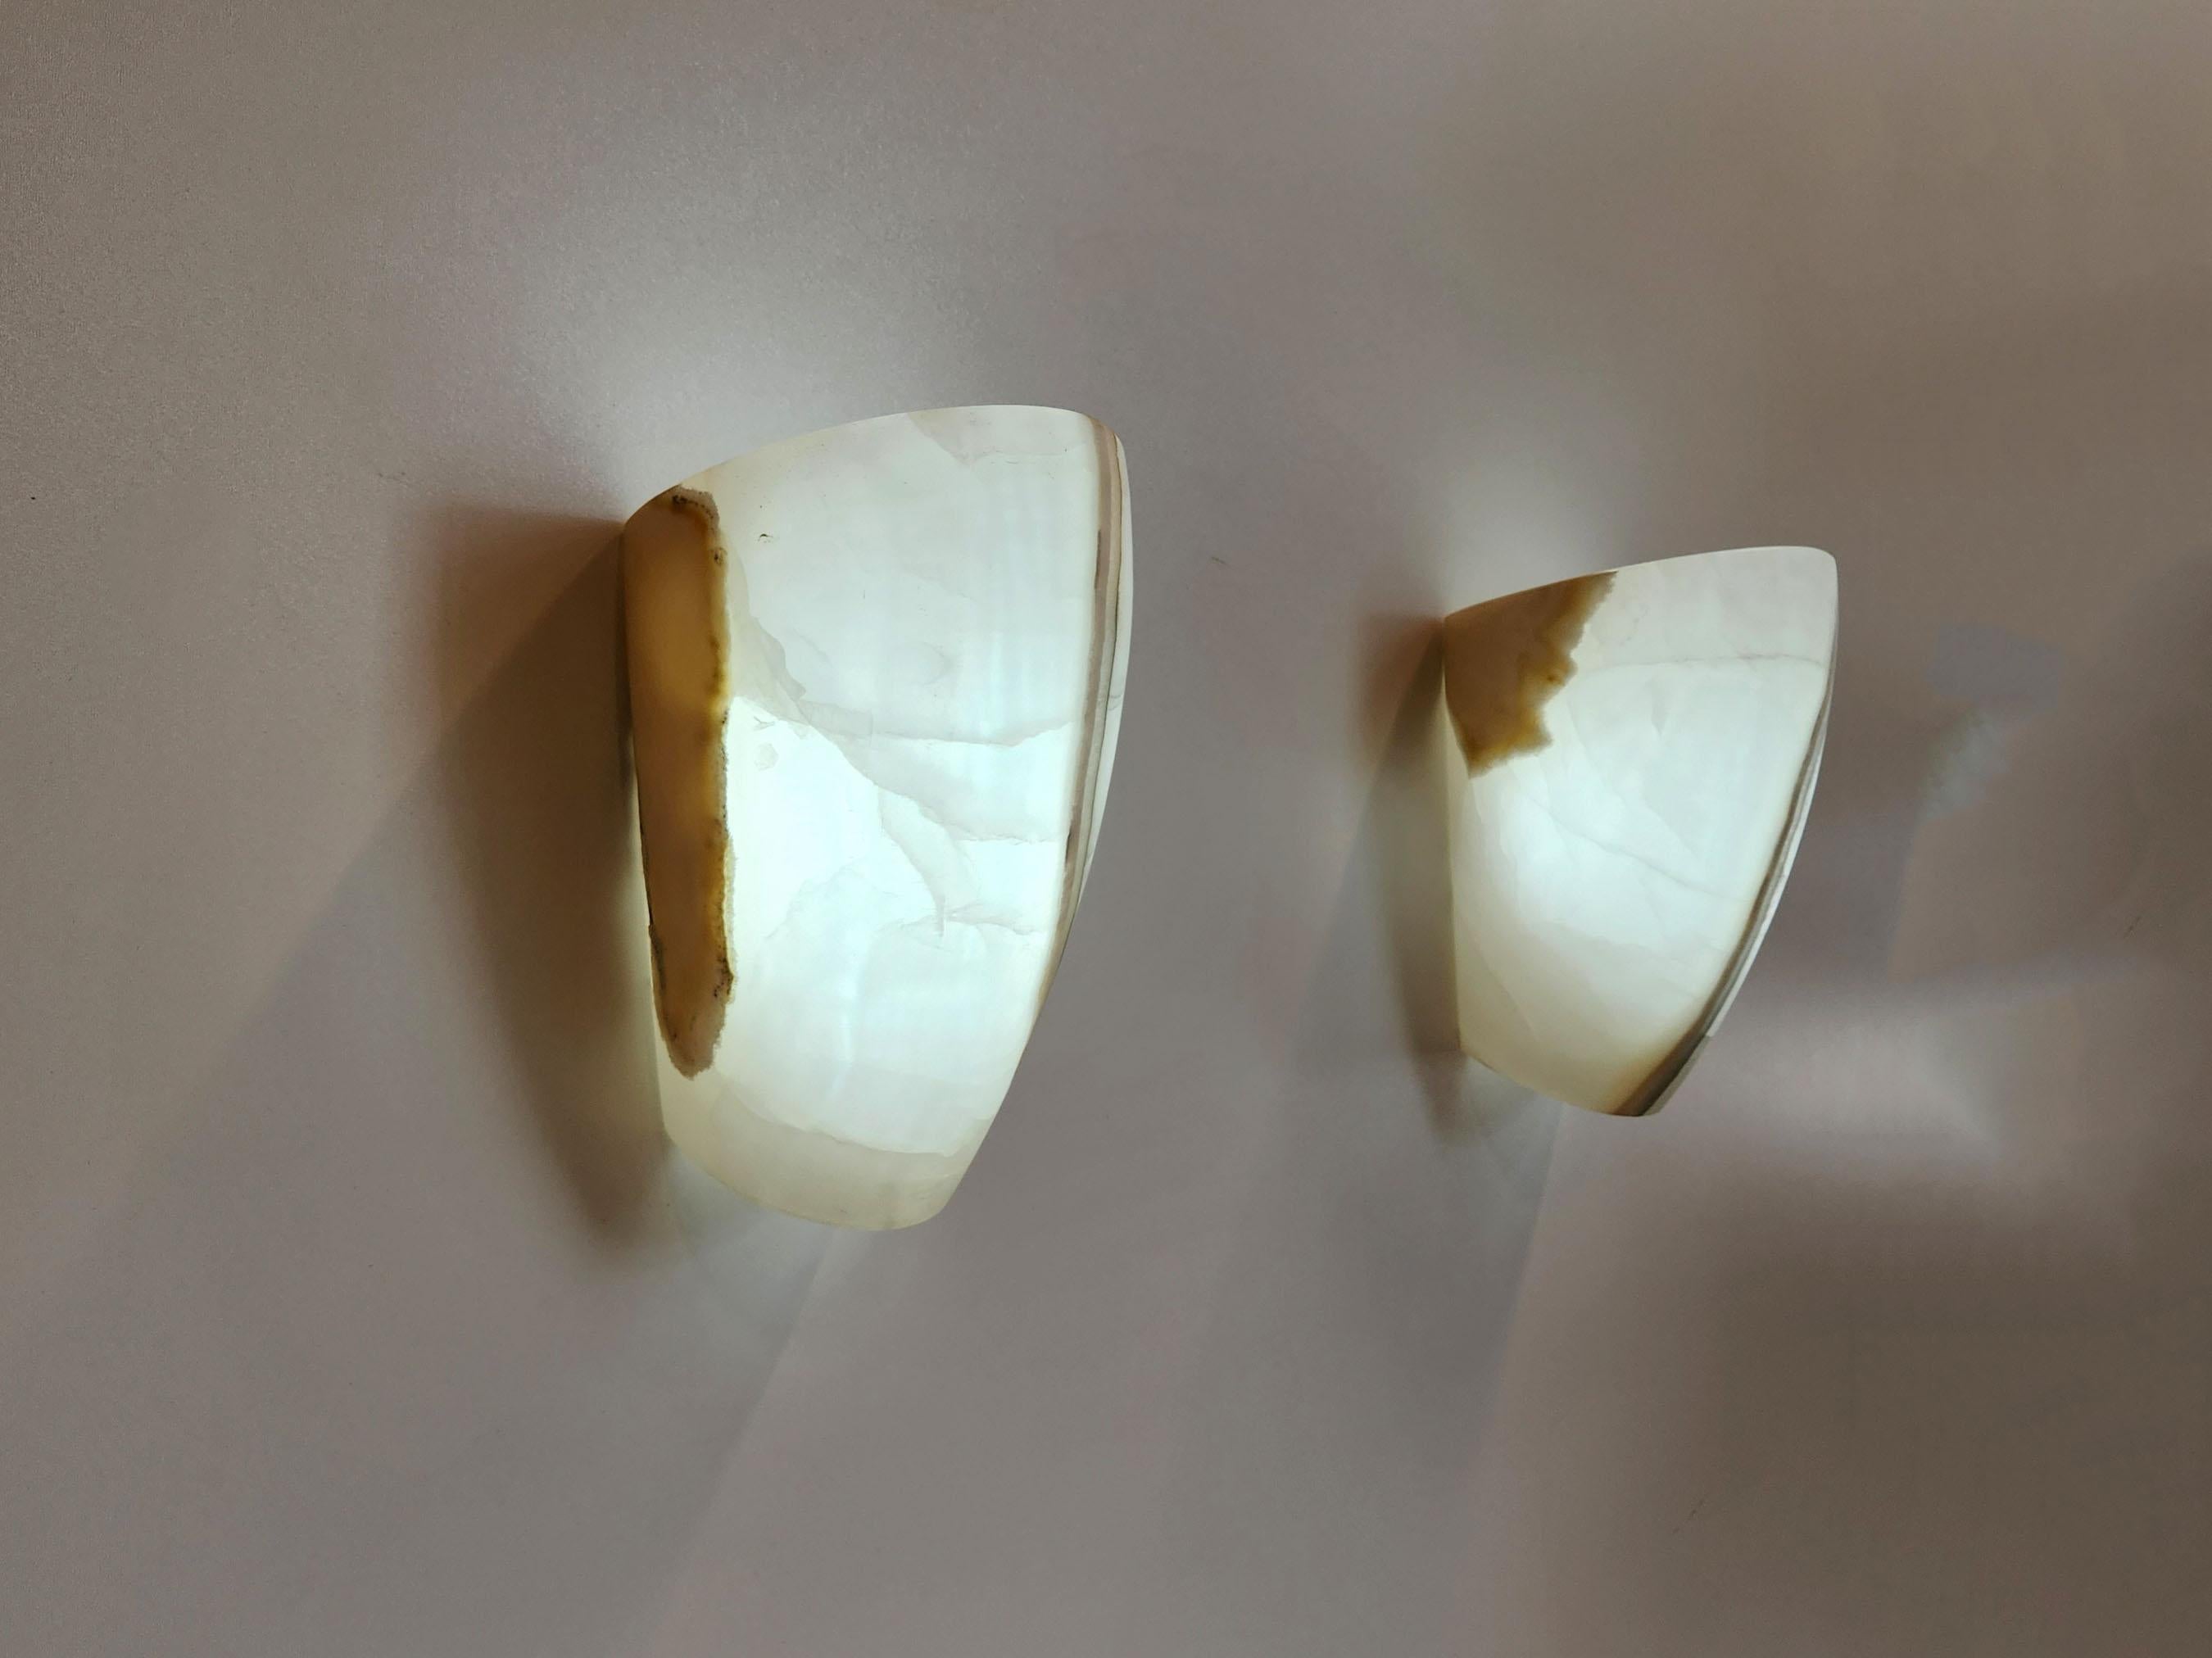 Mexican Hand-carved White Onyx Wall Sconces with Natural Dark Veins For Sale